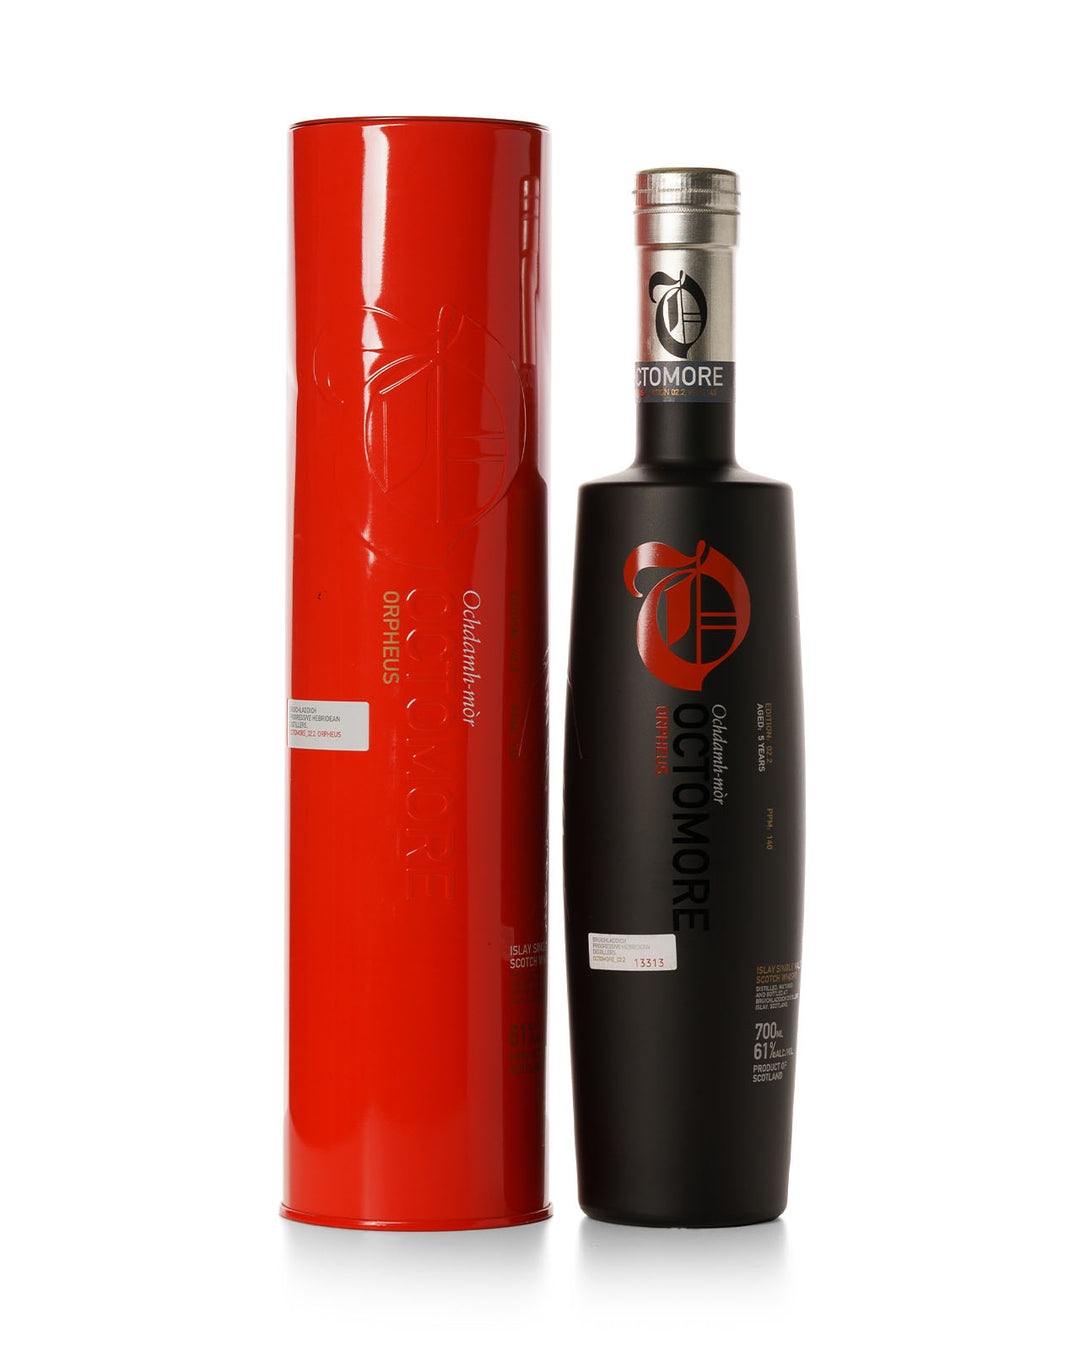 Octomore Orpheus Edition 02.2 5 Year Old With Original Tube